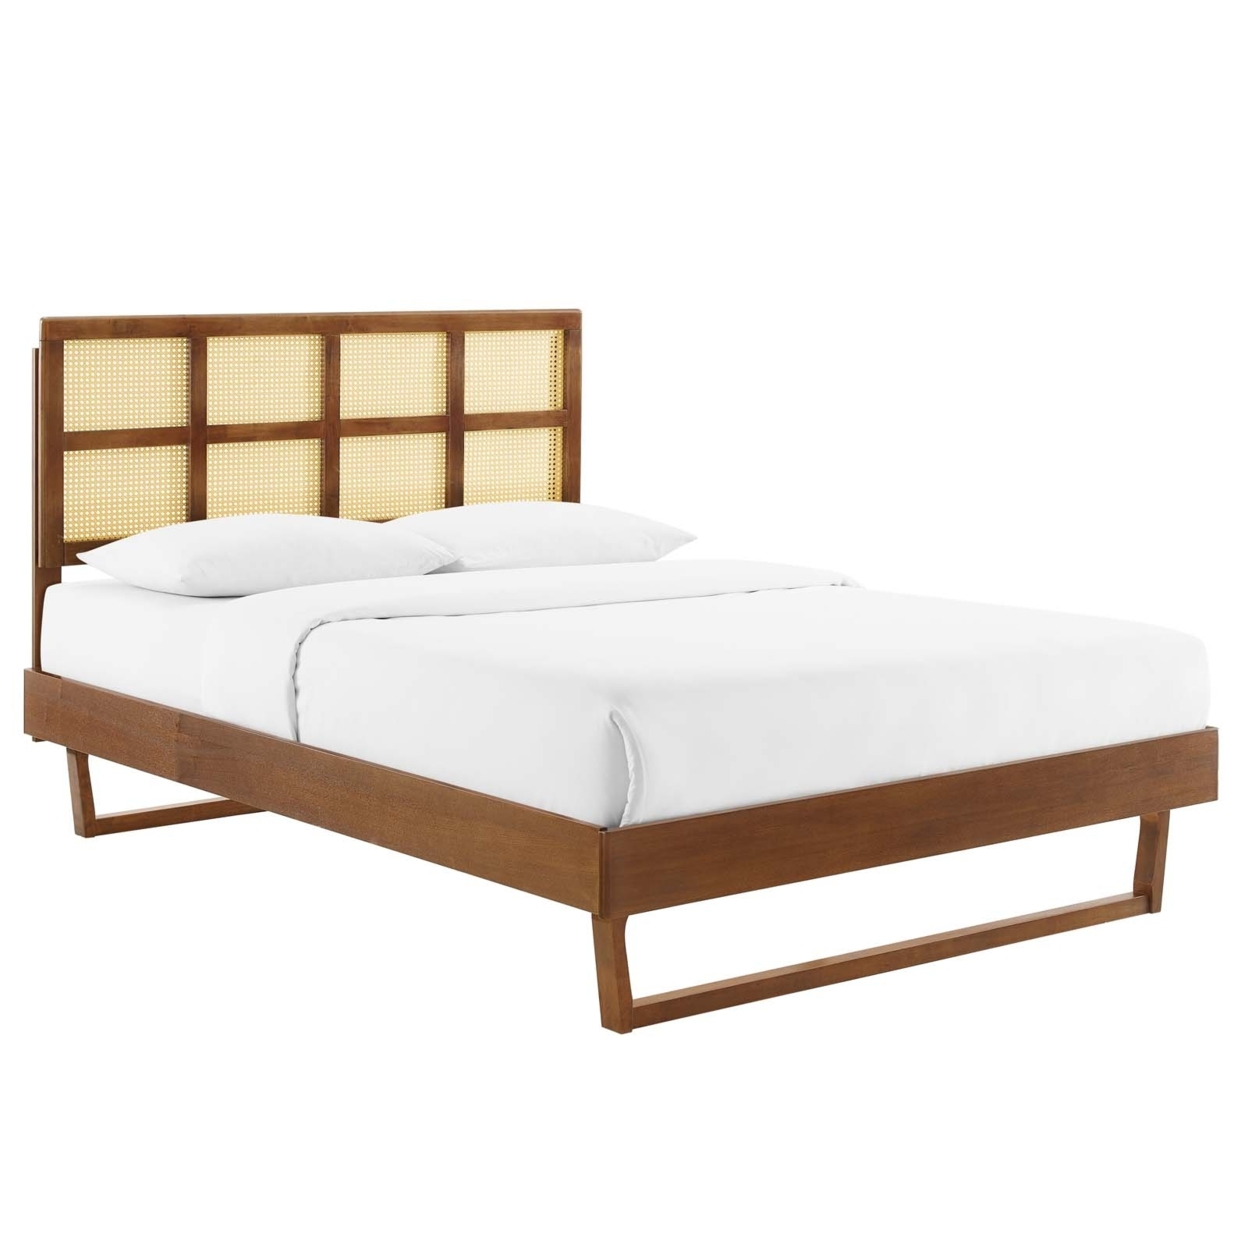 Sidney Cane And Wood Queen Platform Bed With Angular Legs, Walnut